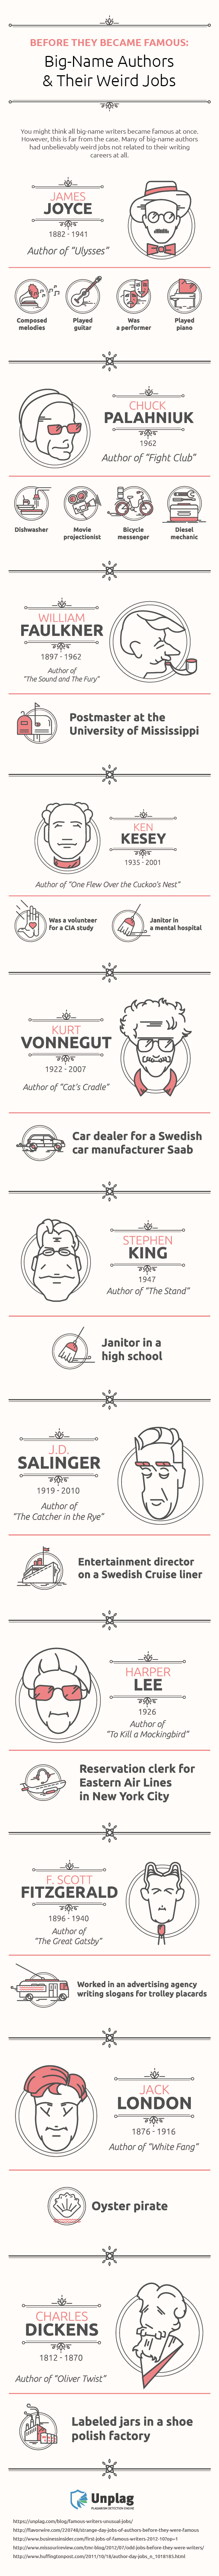 Unusual Jobs of Famous Writers